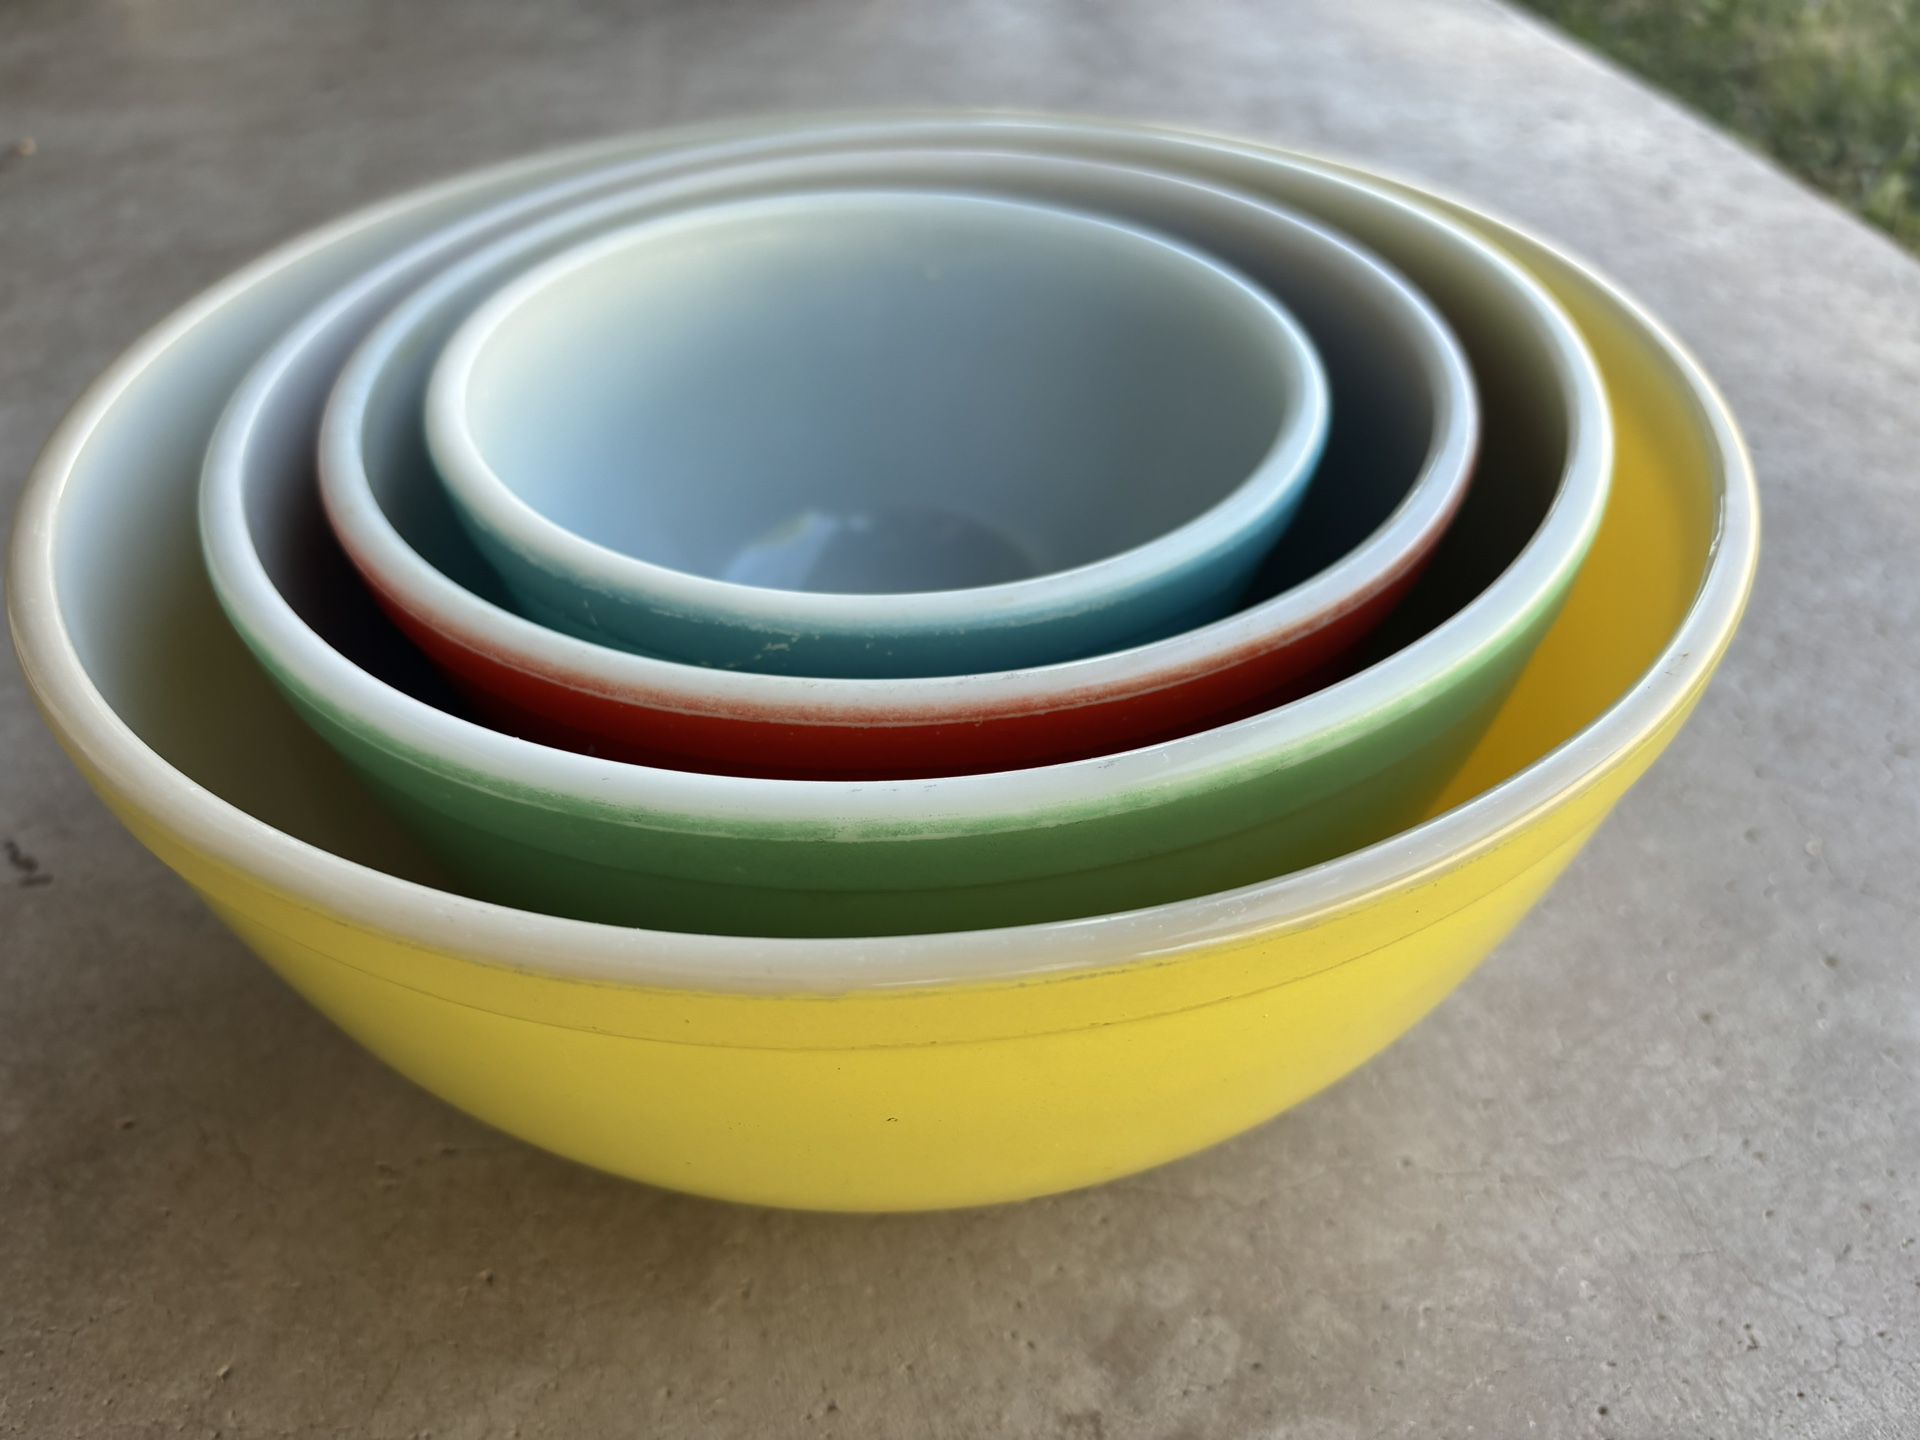 Pending Pick Up** Vintage Pyrex Primary Nesting Mixing Bowls Set Of 4